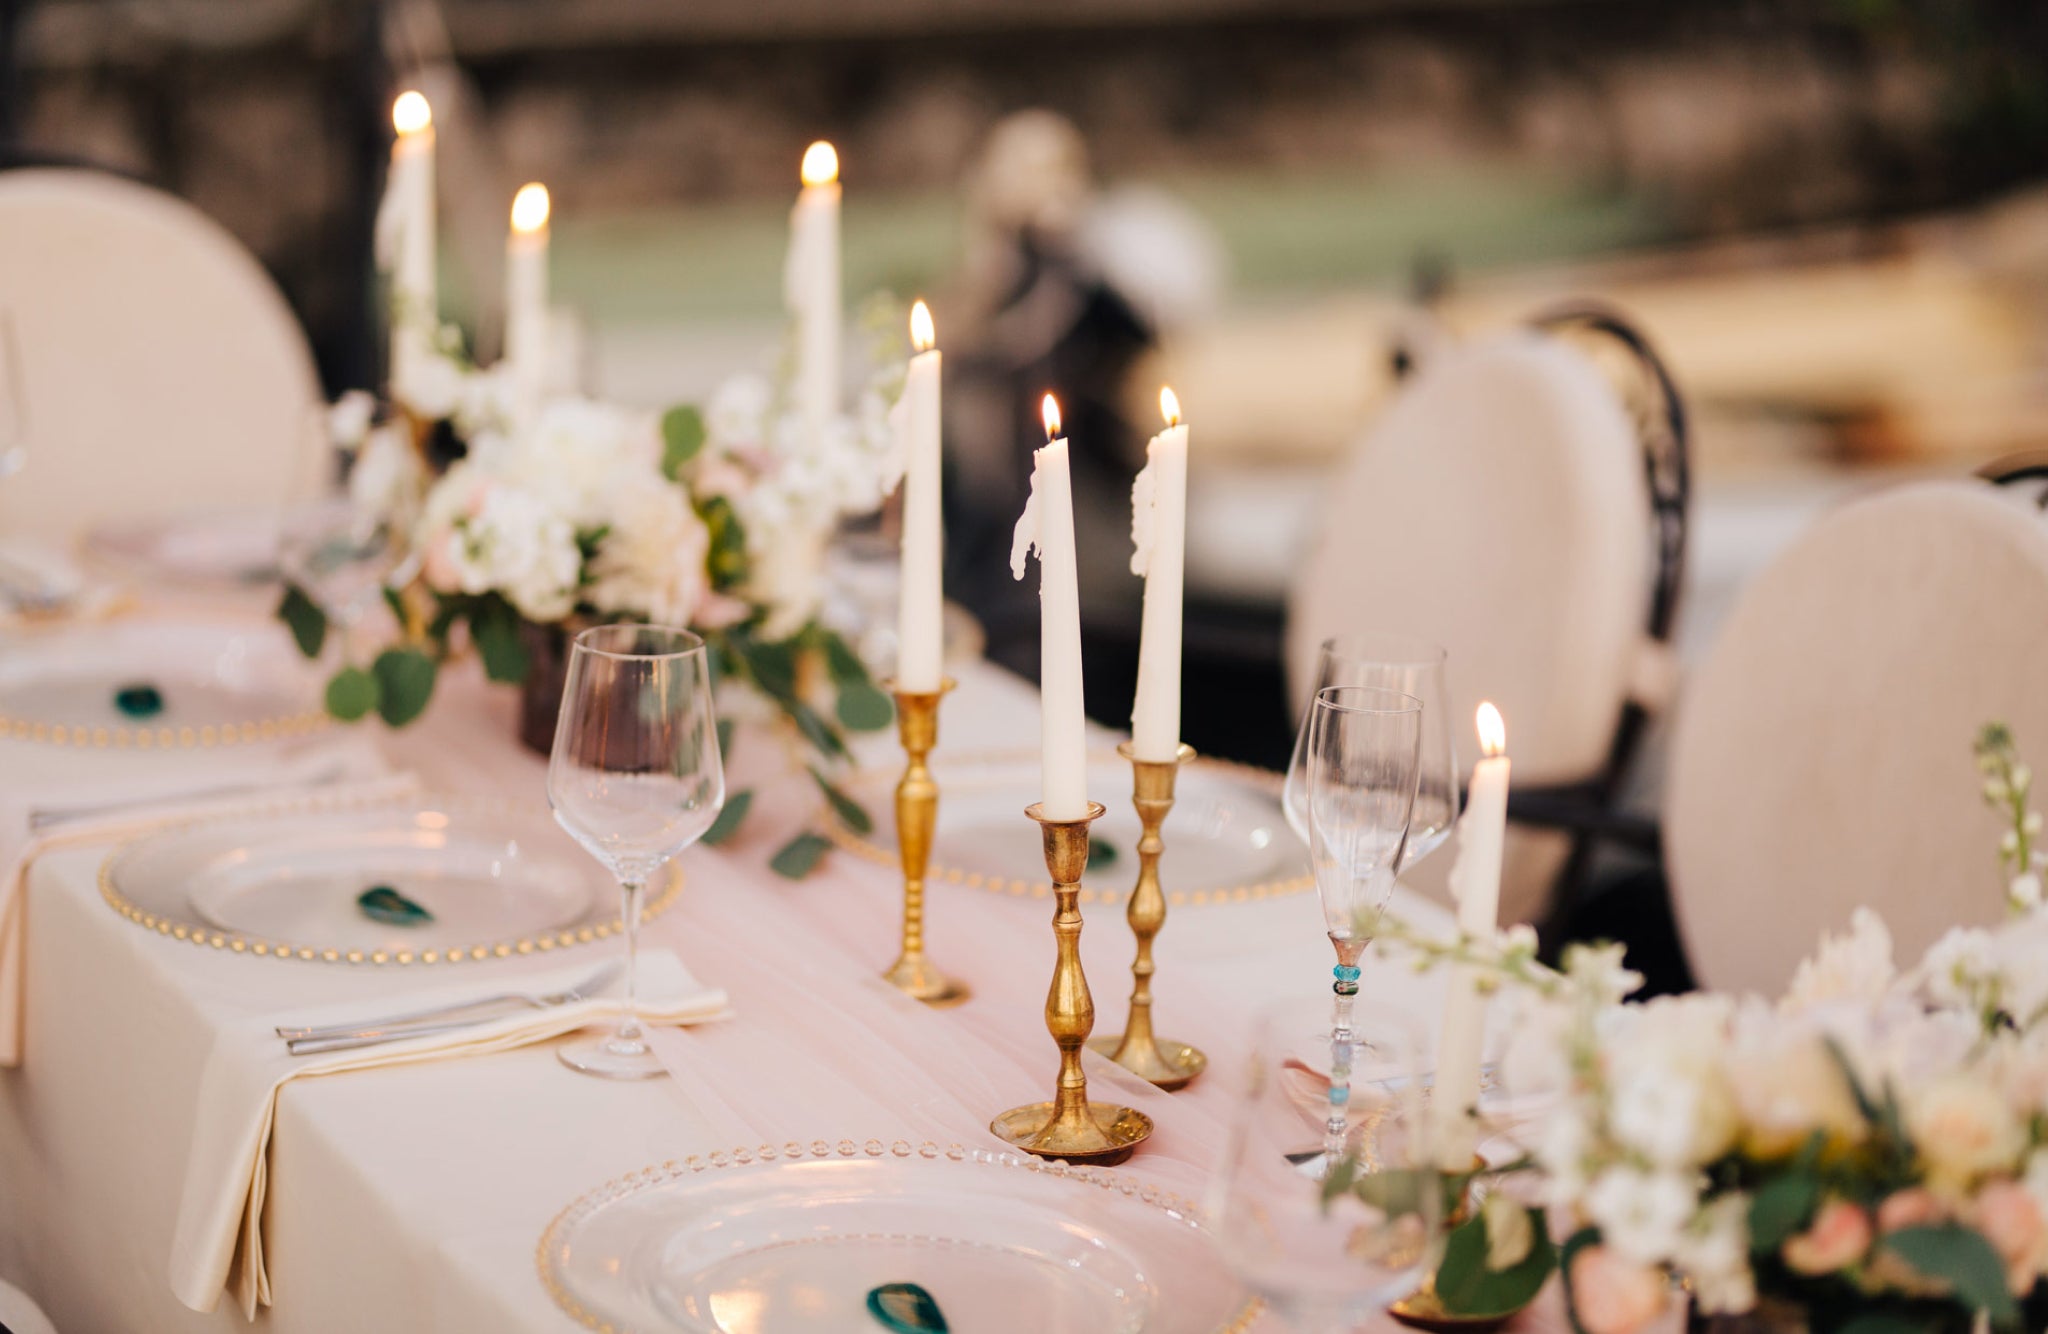 decorating wedding tables with candles